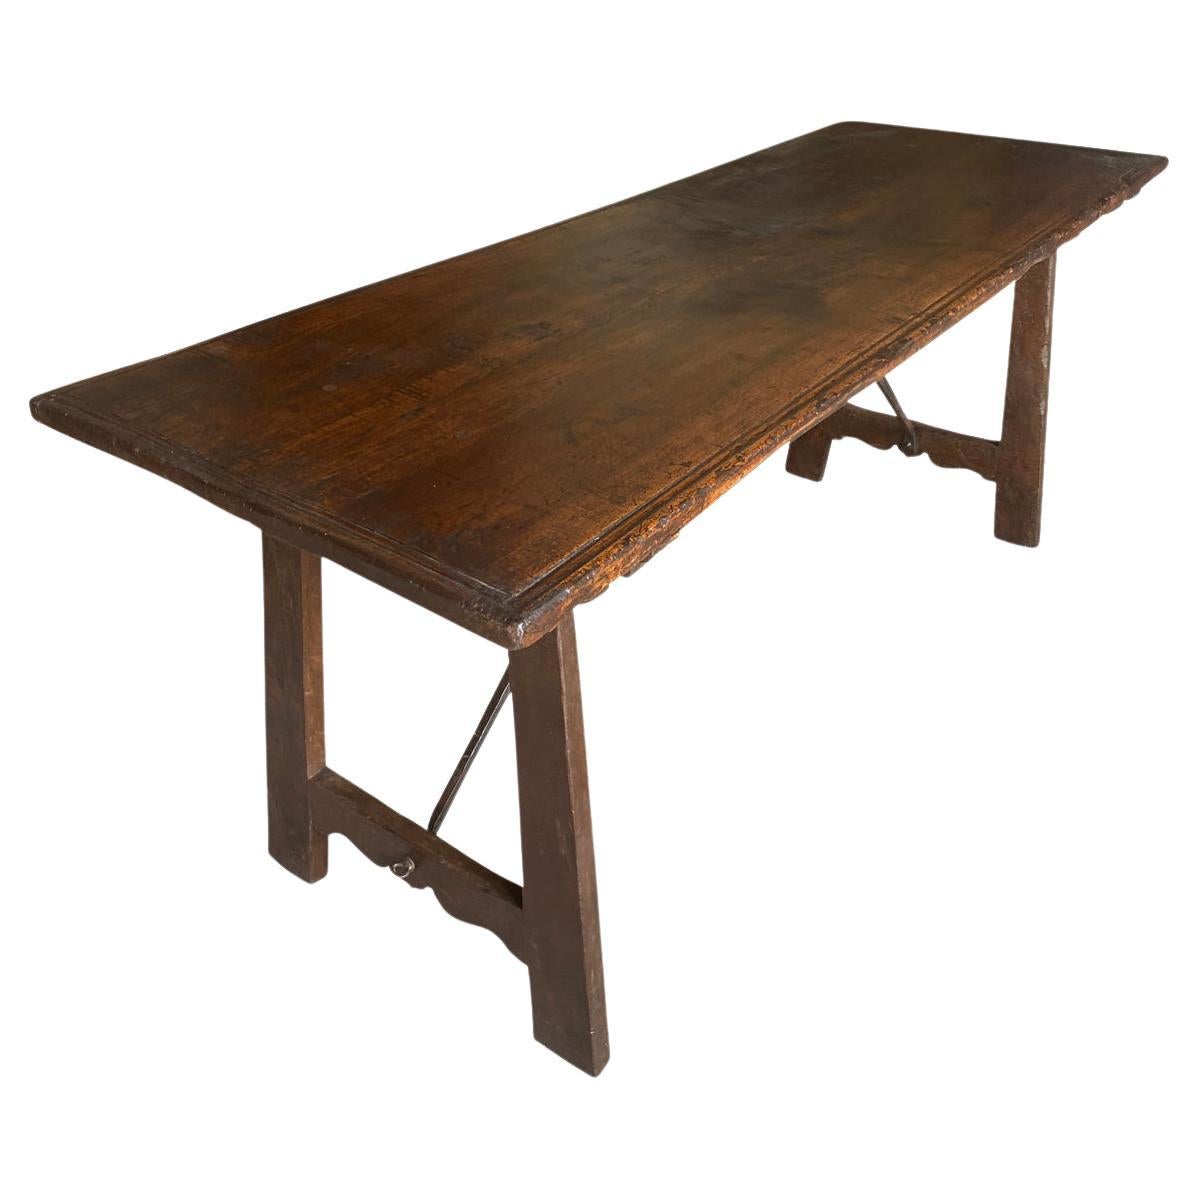 A very stunning 18th century Writing Table - Console Table from the Lombardy region of Italy.  Beautifully constructed from handsome walnut and hand forged iron stretchers.  Outstanding patina - warm and luminous.  Clean minimalist lines -